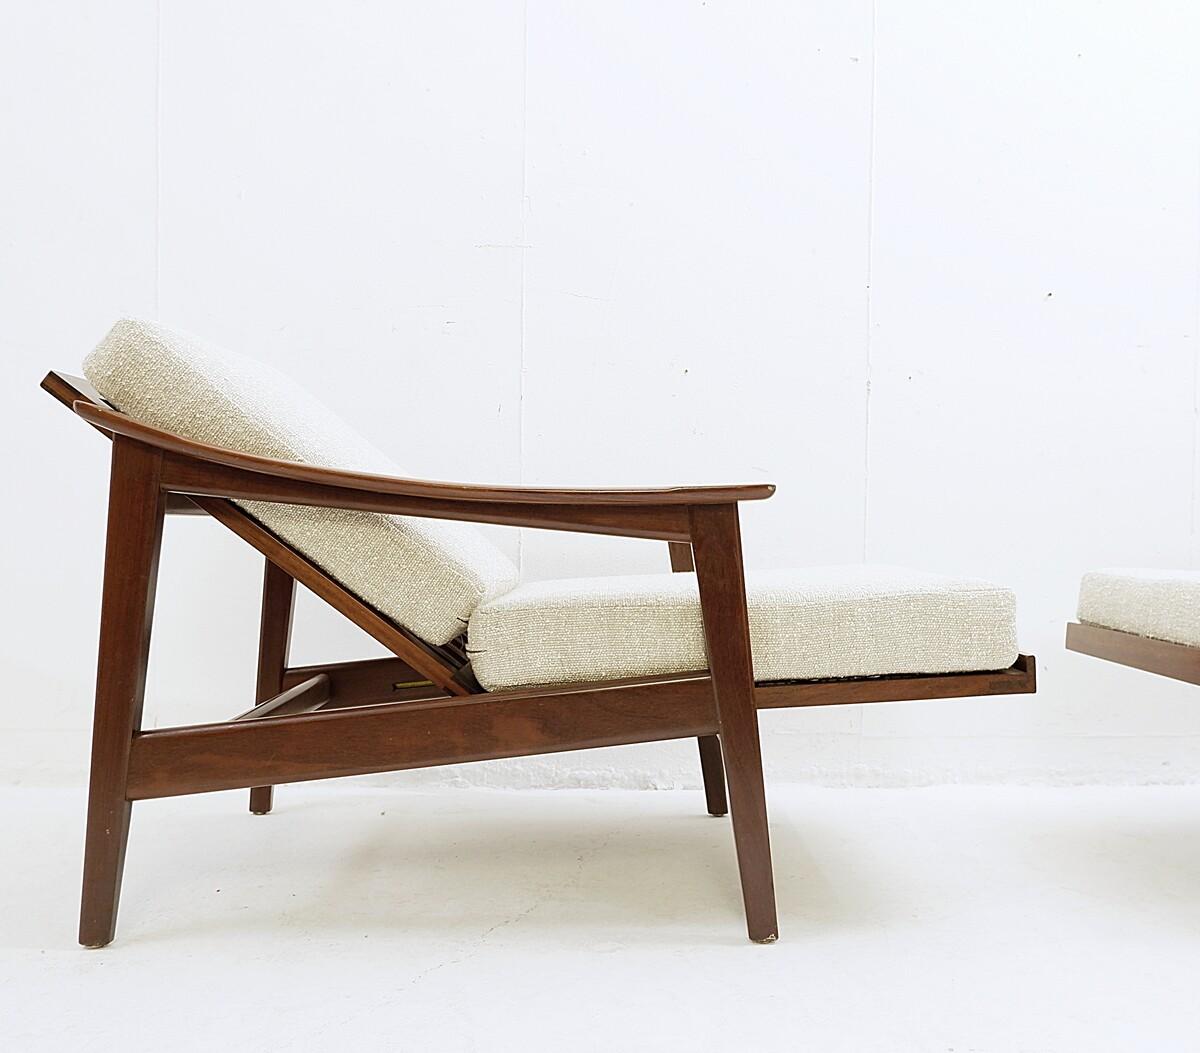 Pair of Mid-Century Modern Scandinavian Armchairs with Adjustable Backrest, 1960 For Sale 5